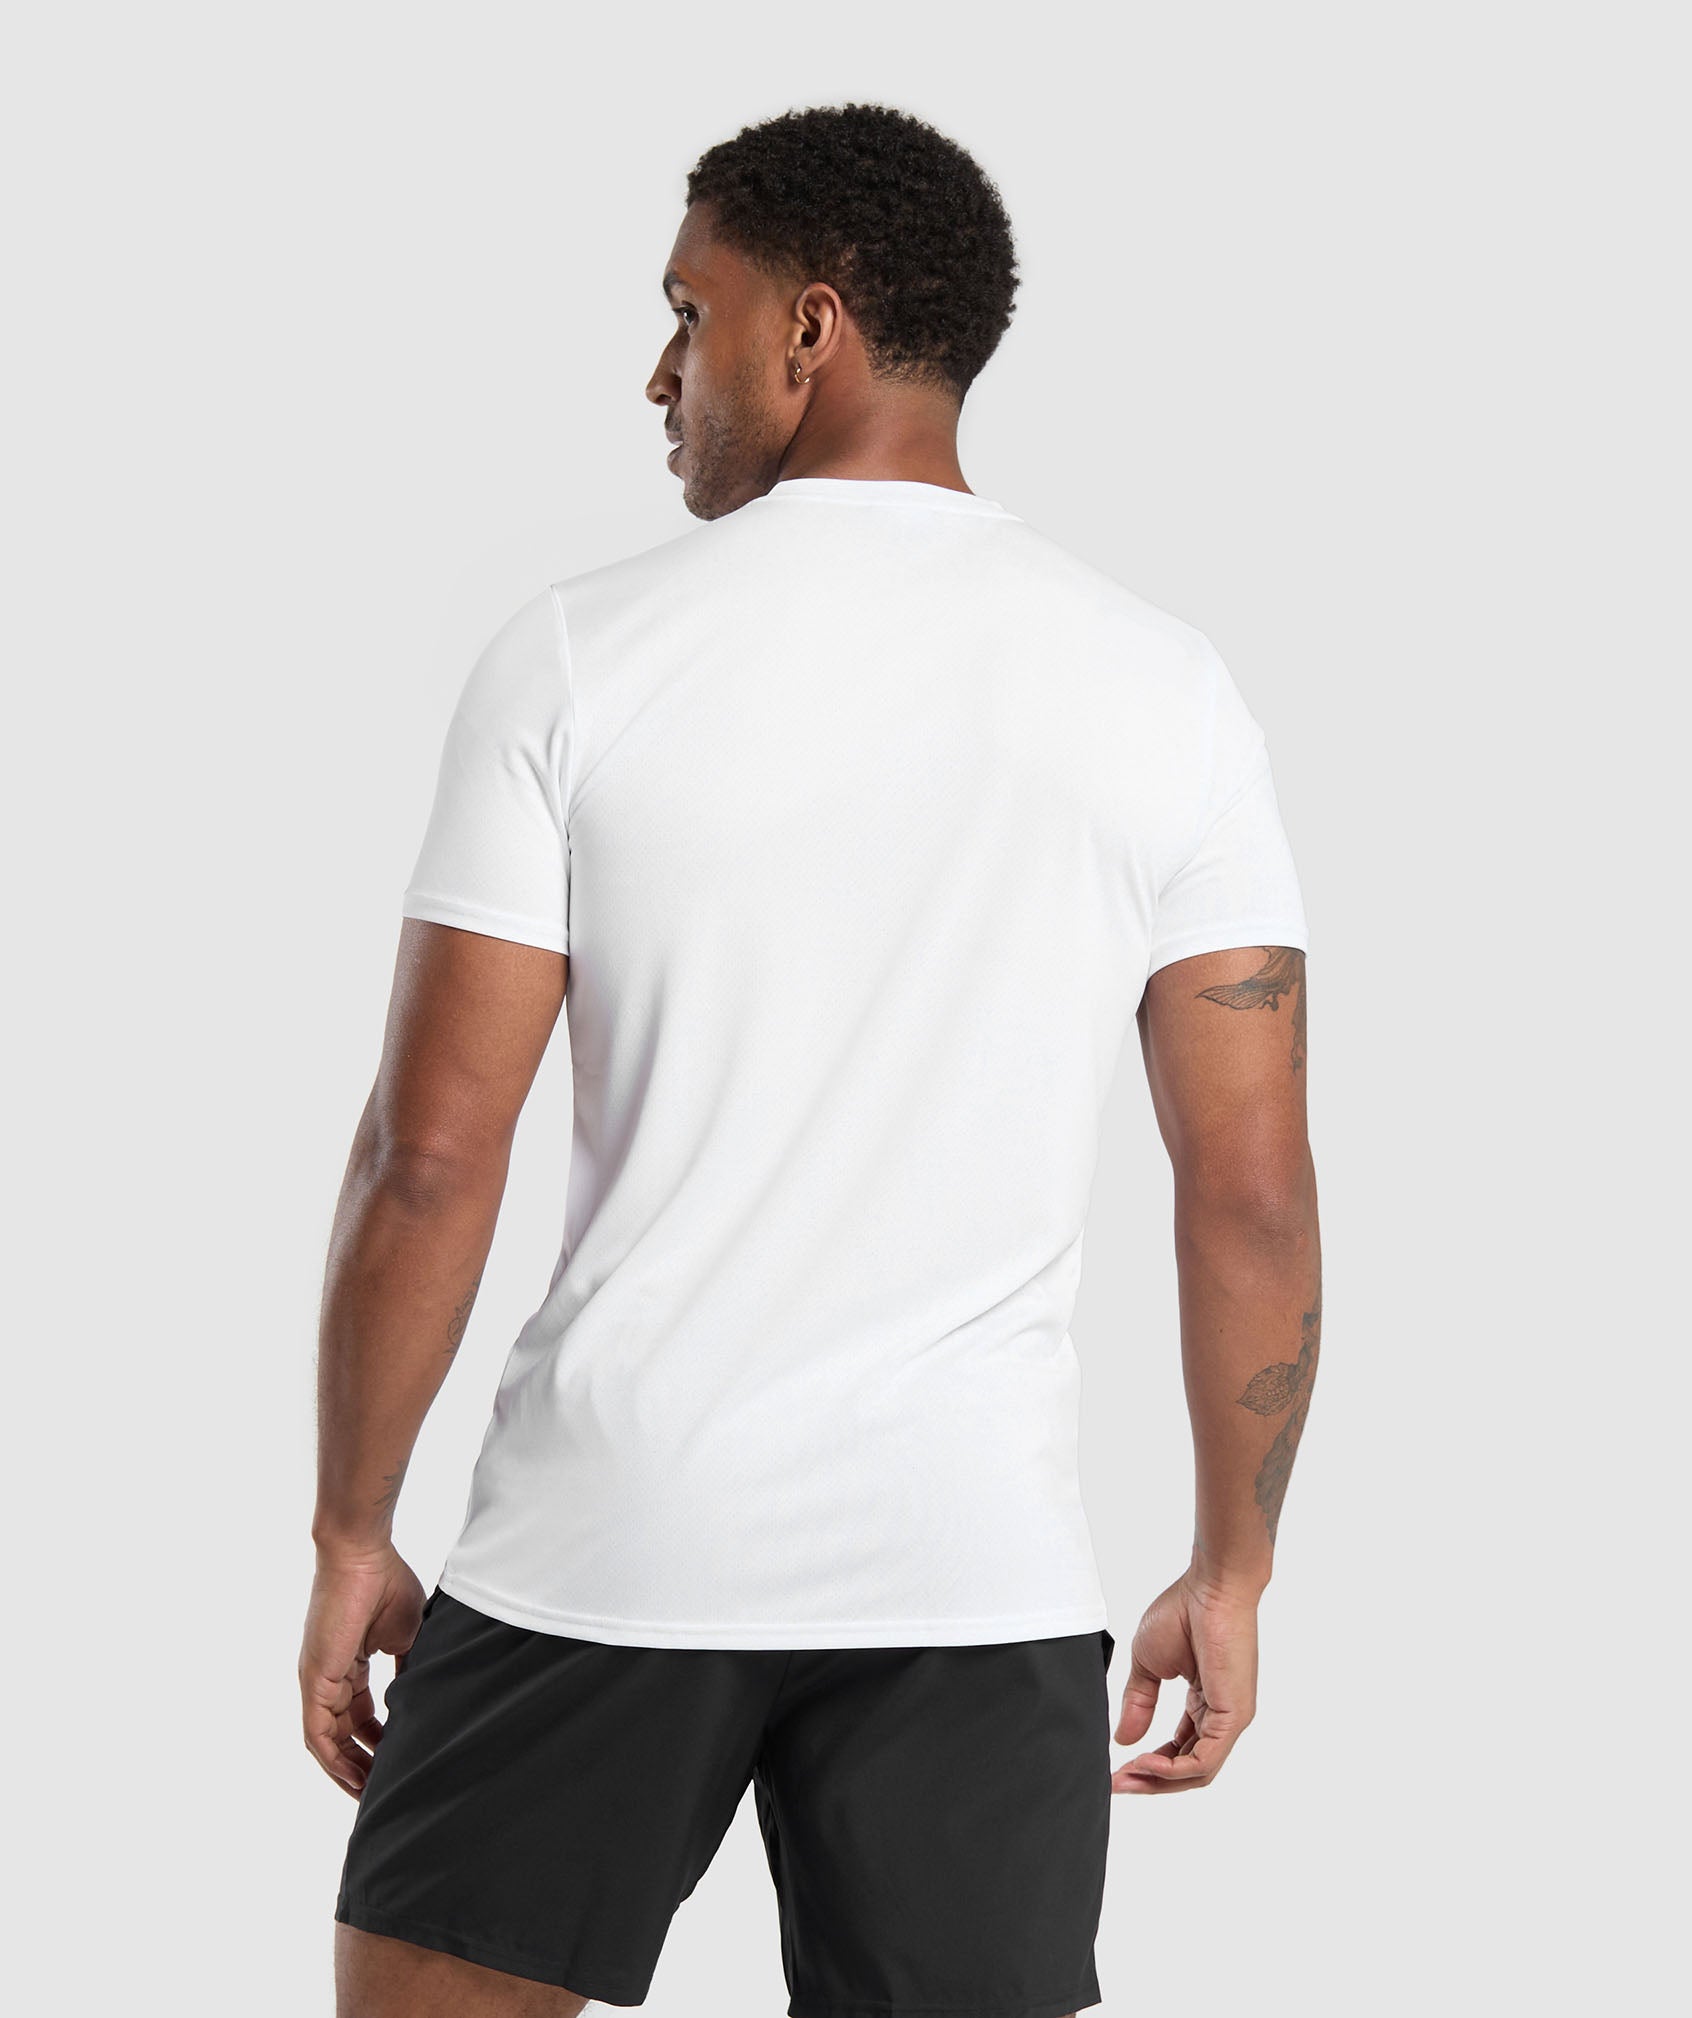 Arrival V-Neck T Shirt in White - view 2